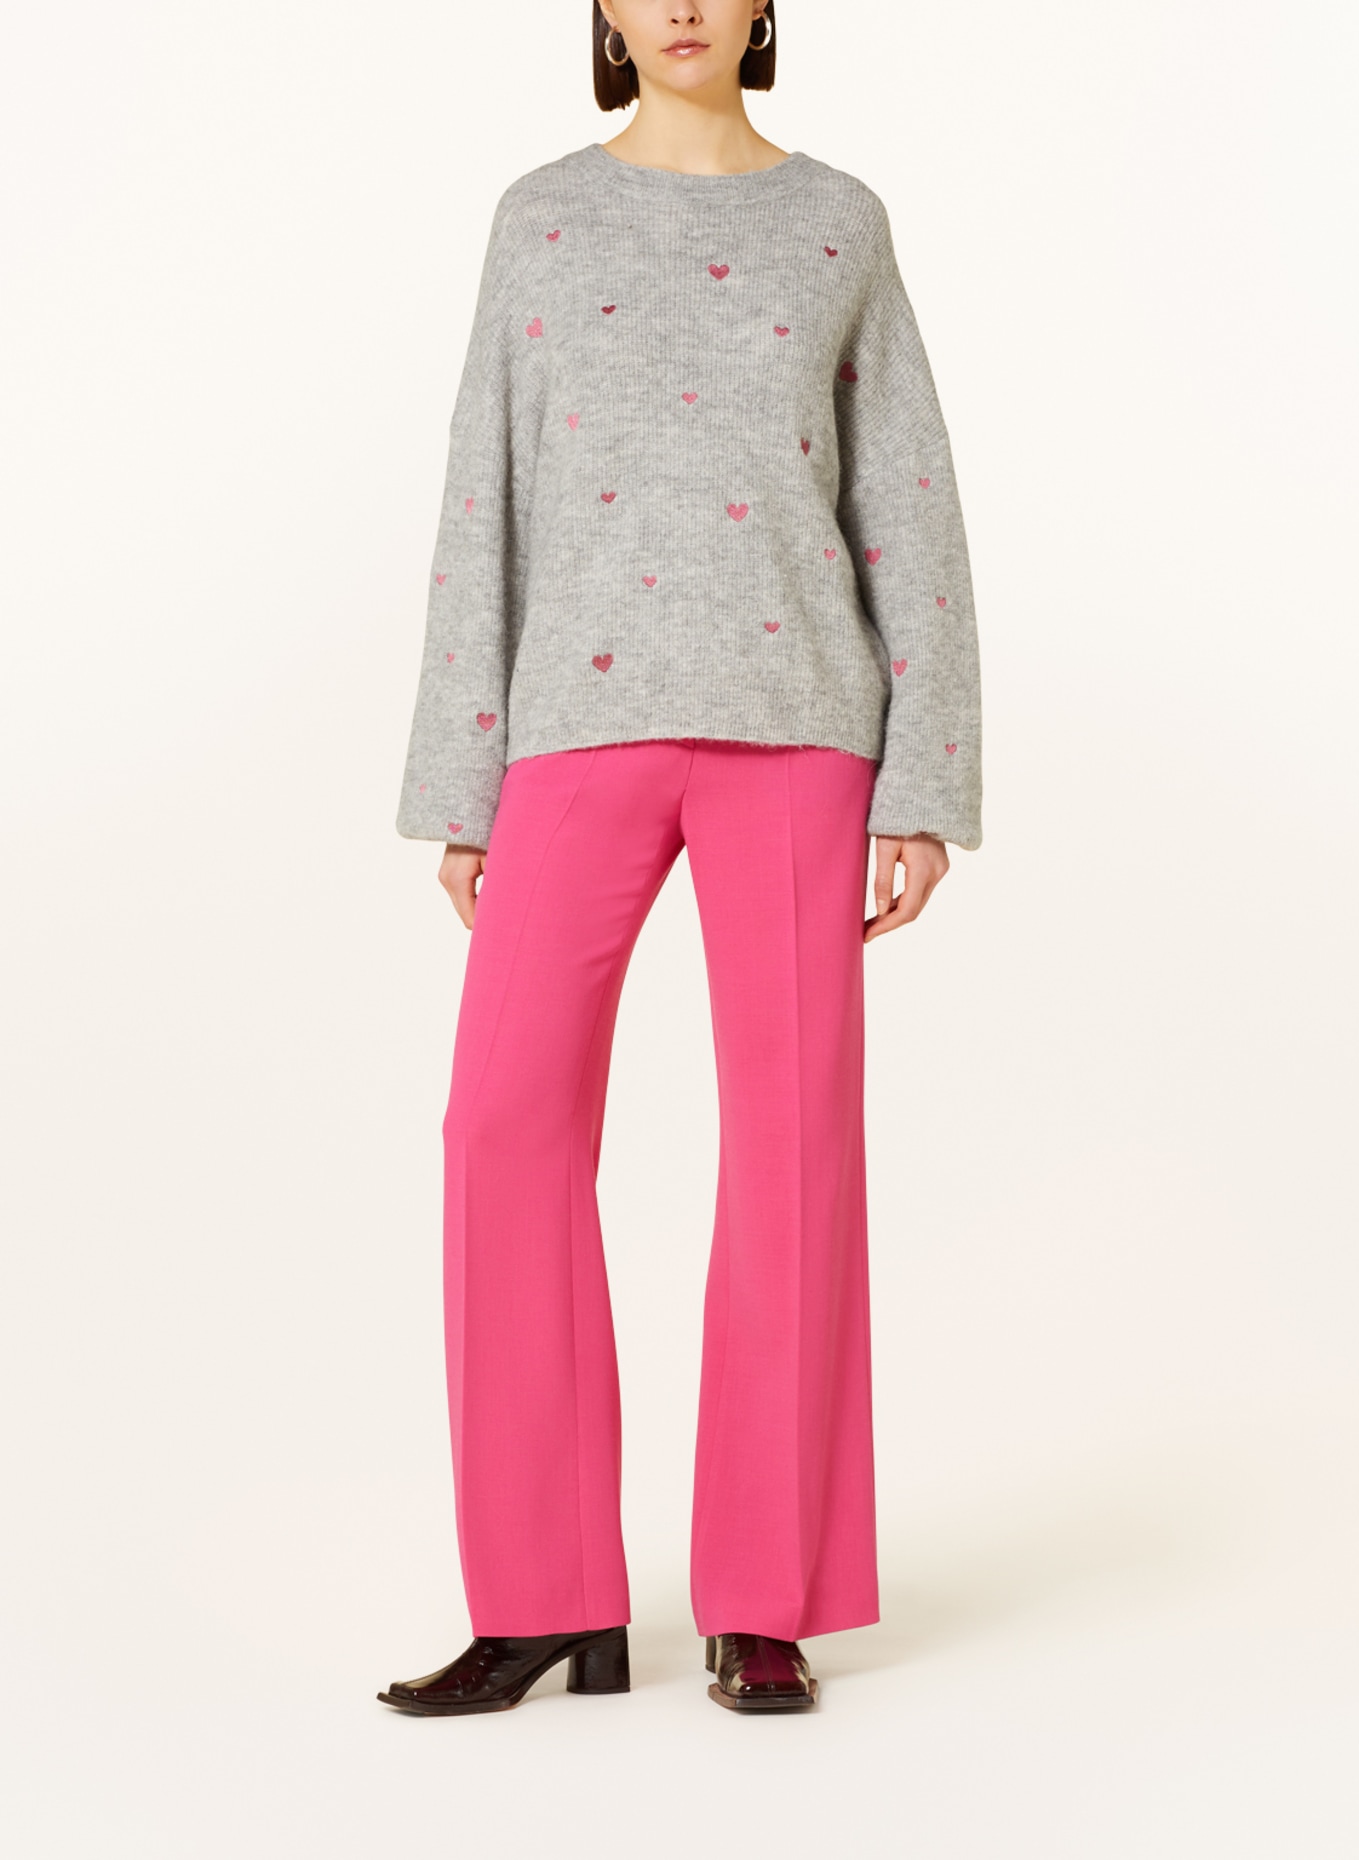 FABIENNE CHAPOT Sweater LIDIA with embroidery, Color: GRAY/ DUSKY PINK (Image 2)